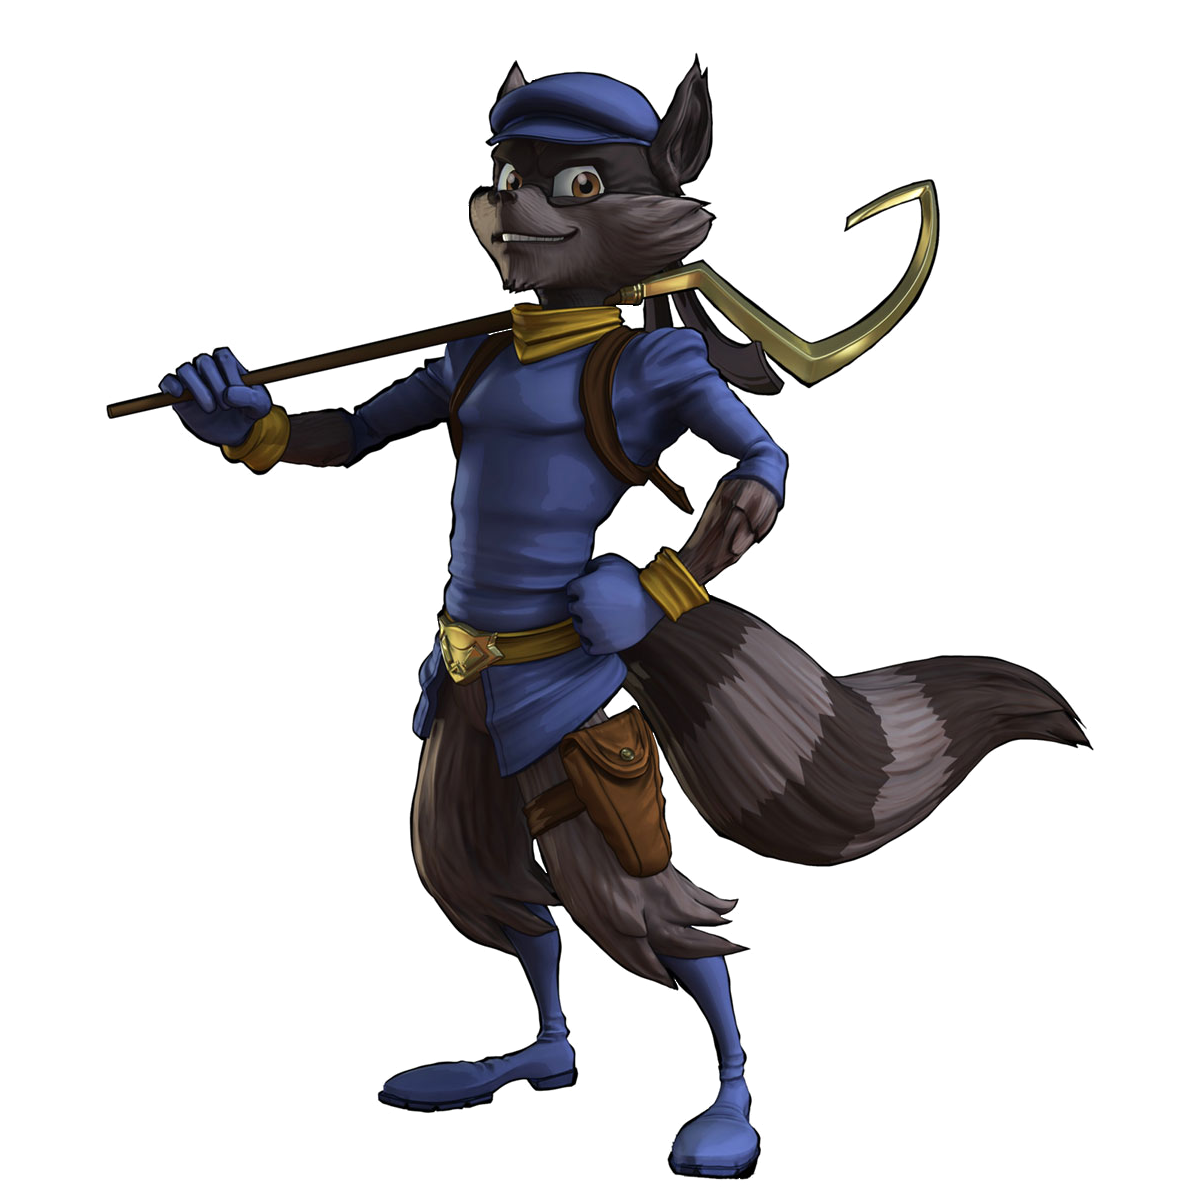 Fixing Sly Cooper: Thieves in Time (A Thread) : r/Slycooper